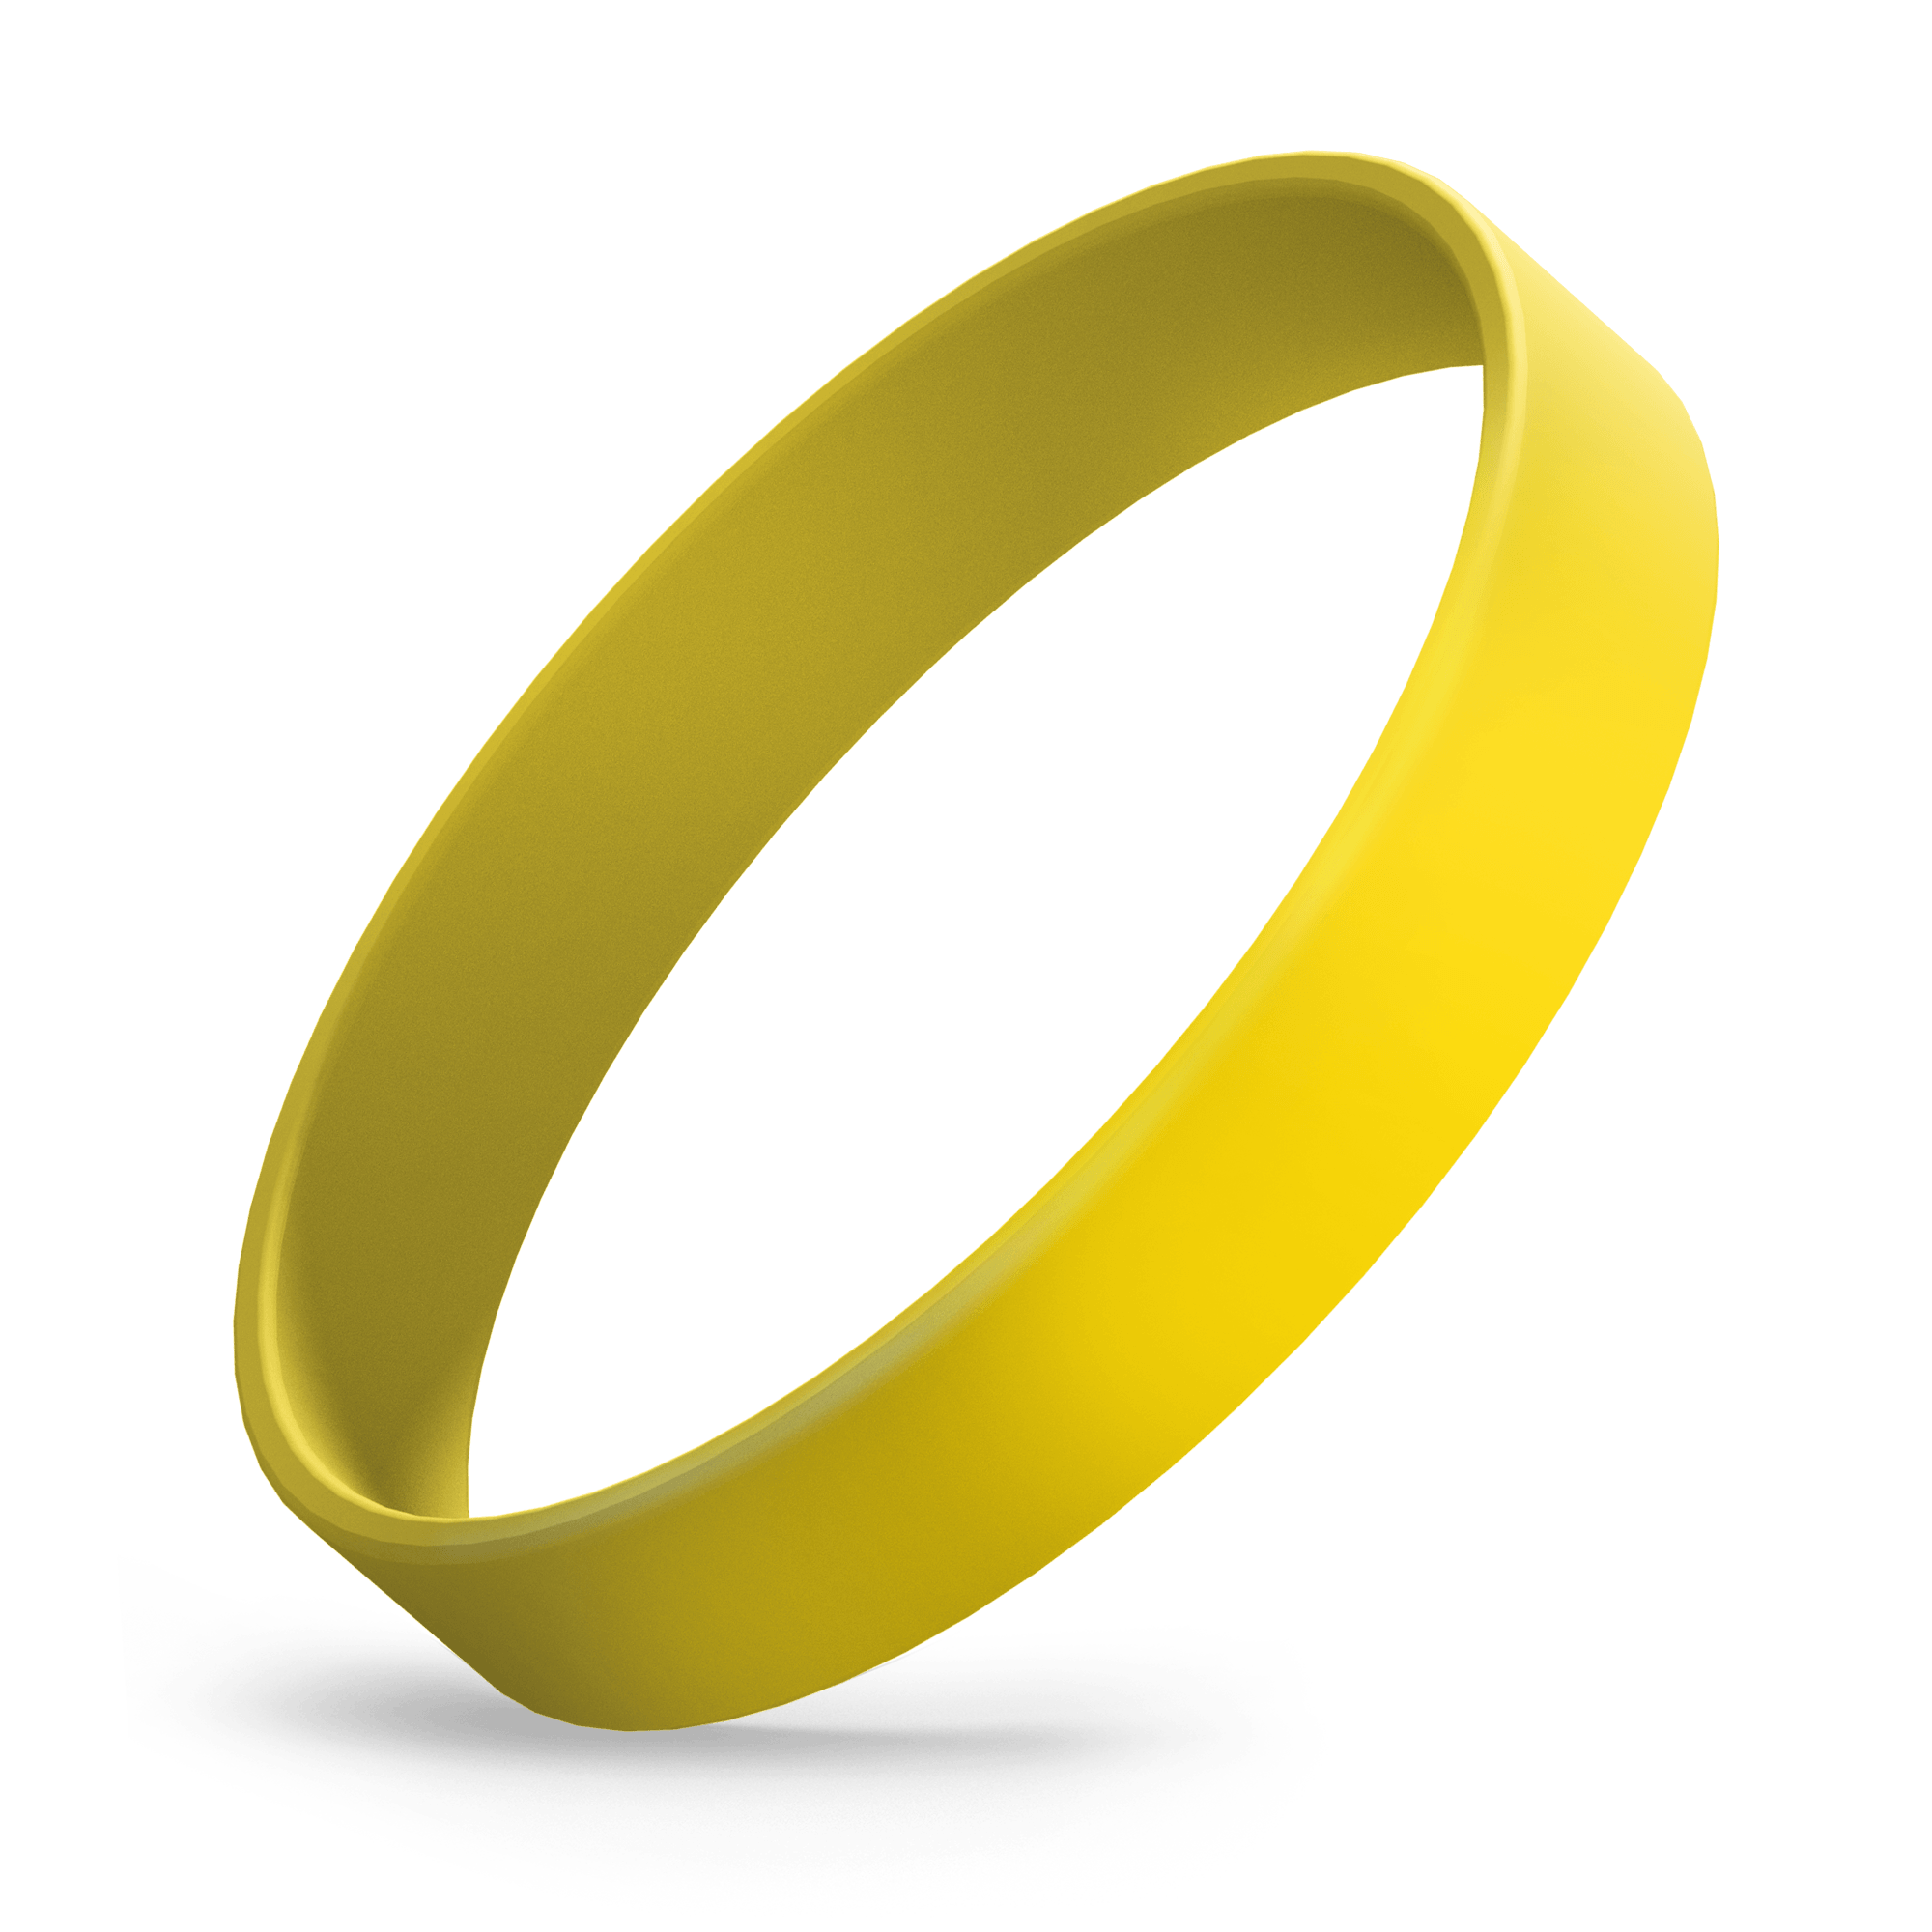 Custom Printed (Yellow Gold) Silicone Wristbands - Rubber Bracelets by Wristband Resources